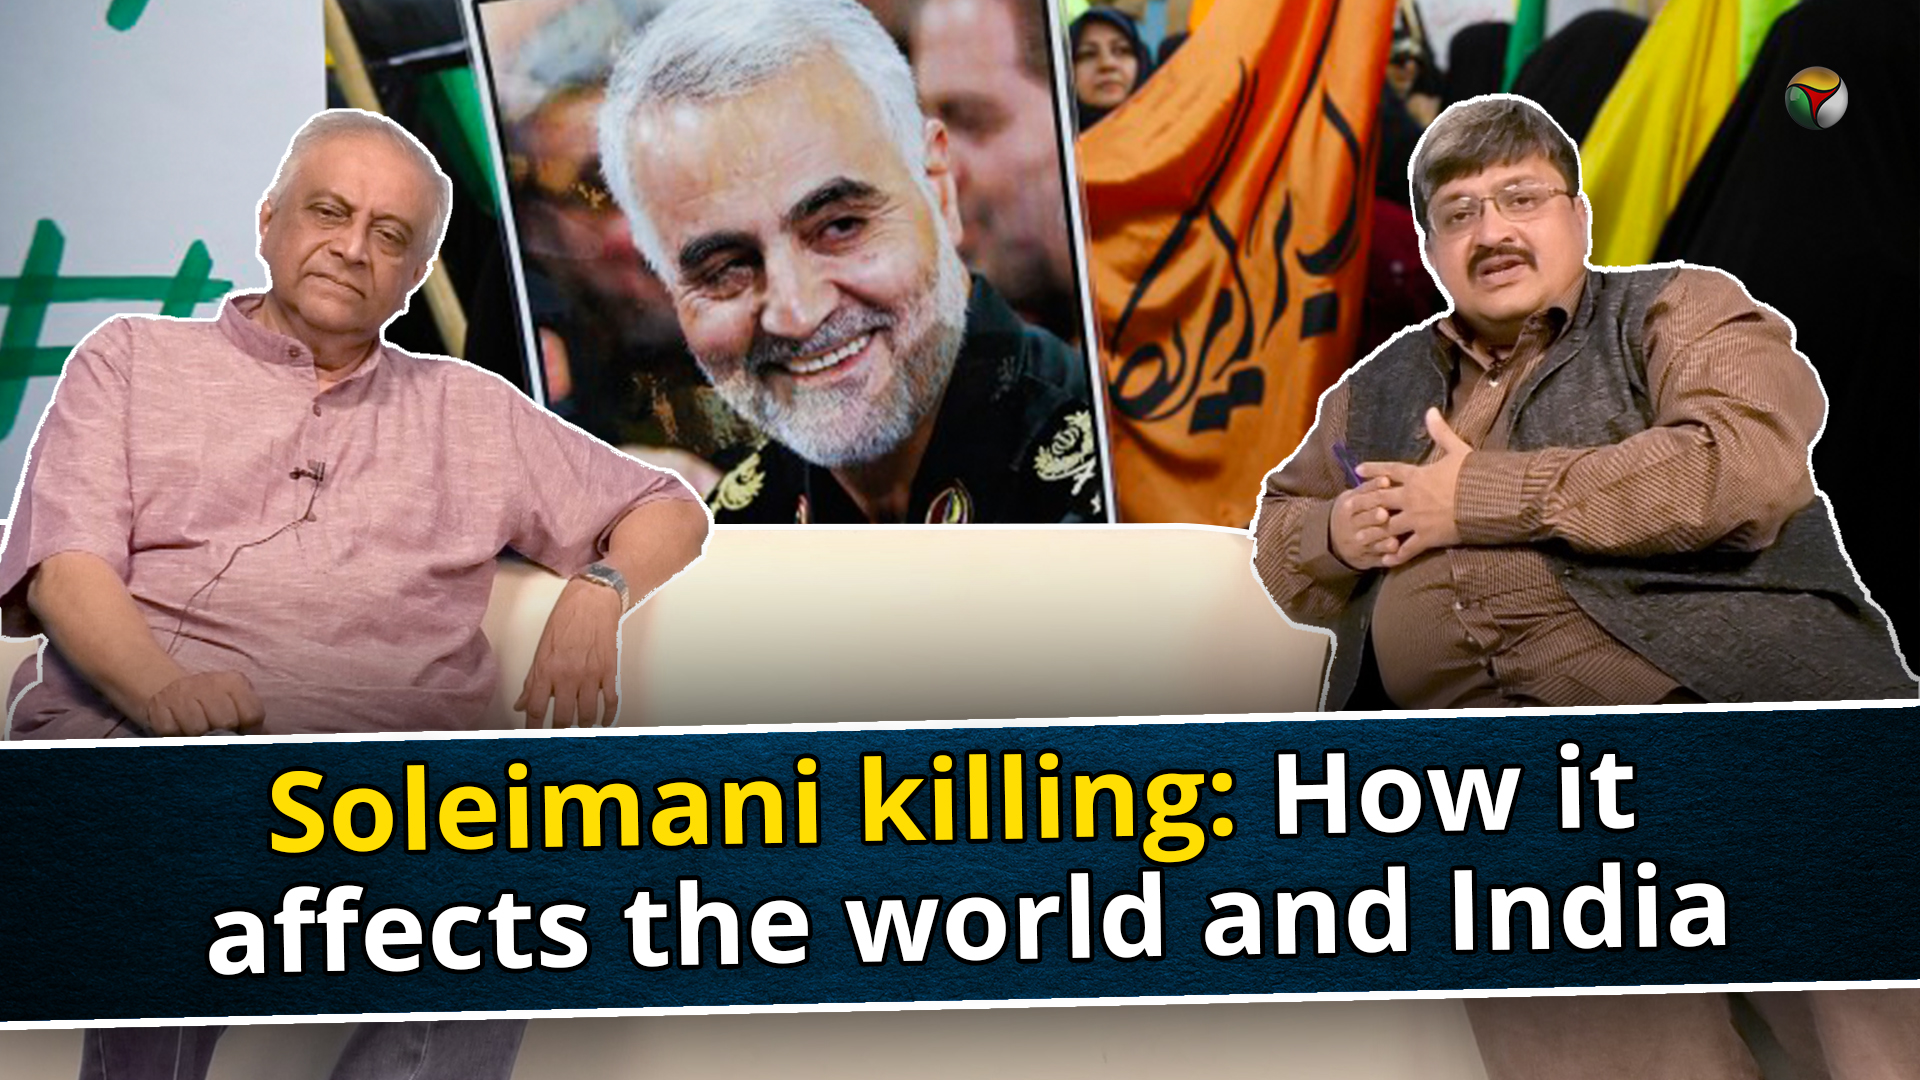 Soleimani killing: How it affects the world and India